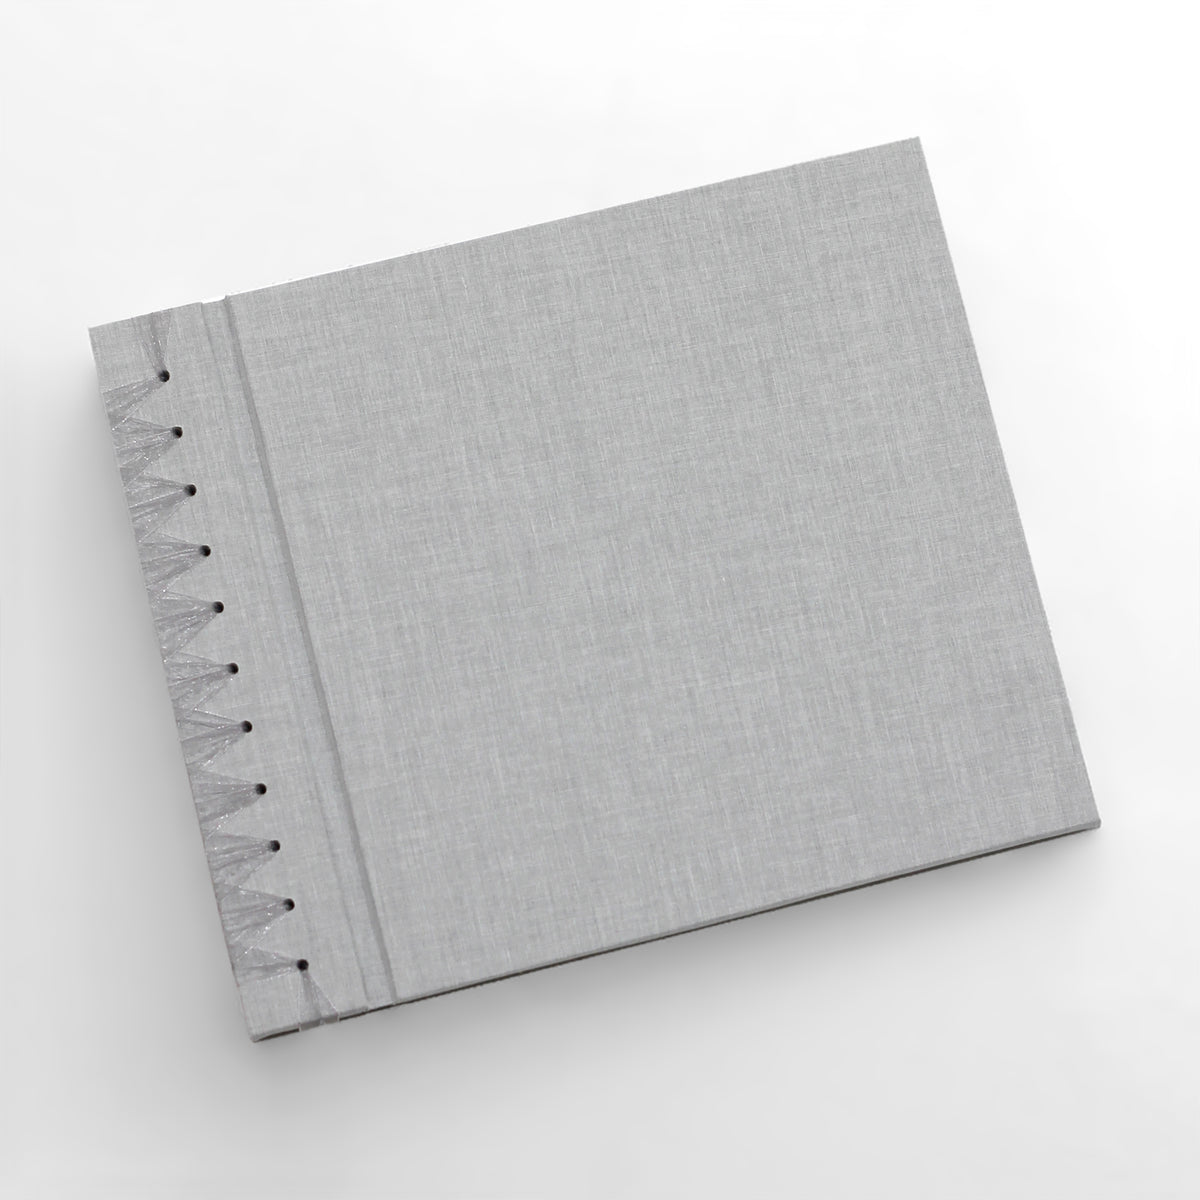 Deluxe 12 x 15 Paper Page Album | Cover: Dove Gray Linen | Available Personalized